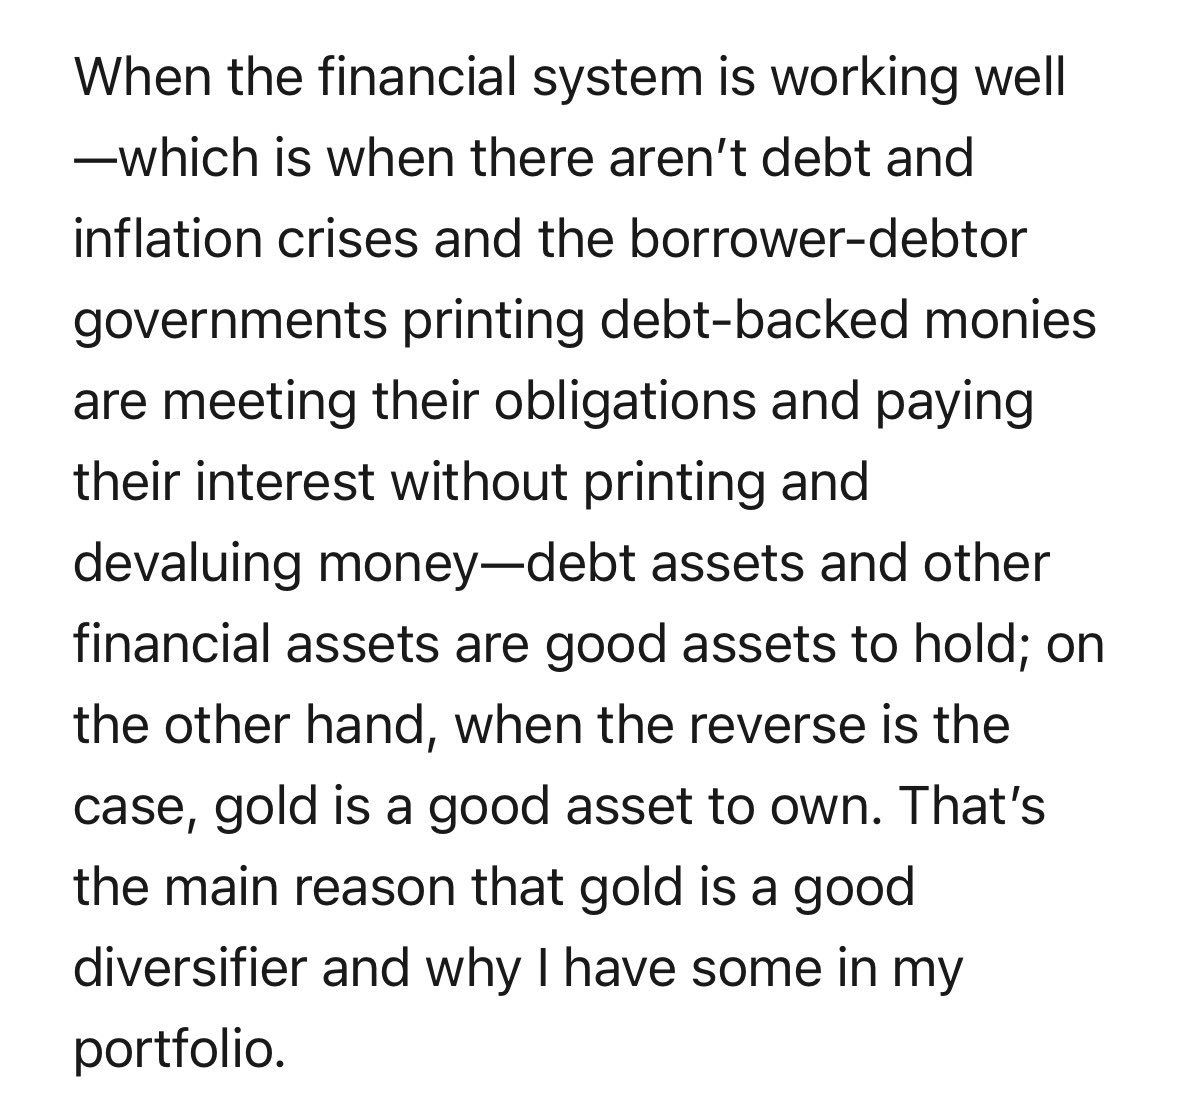 New Dalio post correctly identifies gold as “non-debt money” But then he says “cryptocurrencies are also non-debt monies” False! Stablecoins are debt monies. As are any centralized token schemes or any digital coins whose issuance can be modified Bitcoin is non-debt money ✅